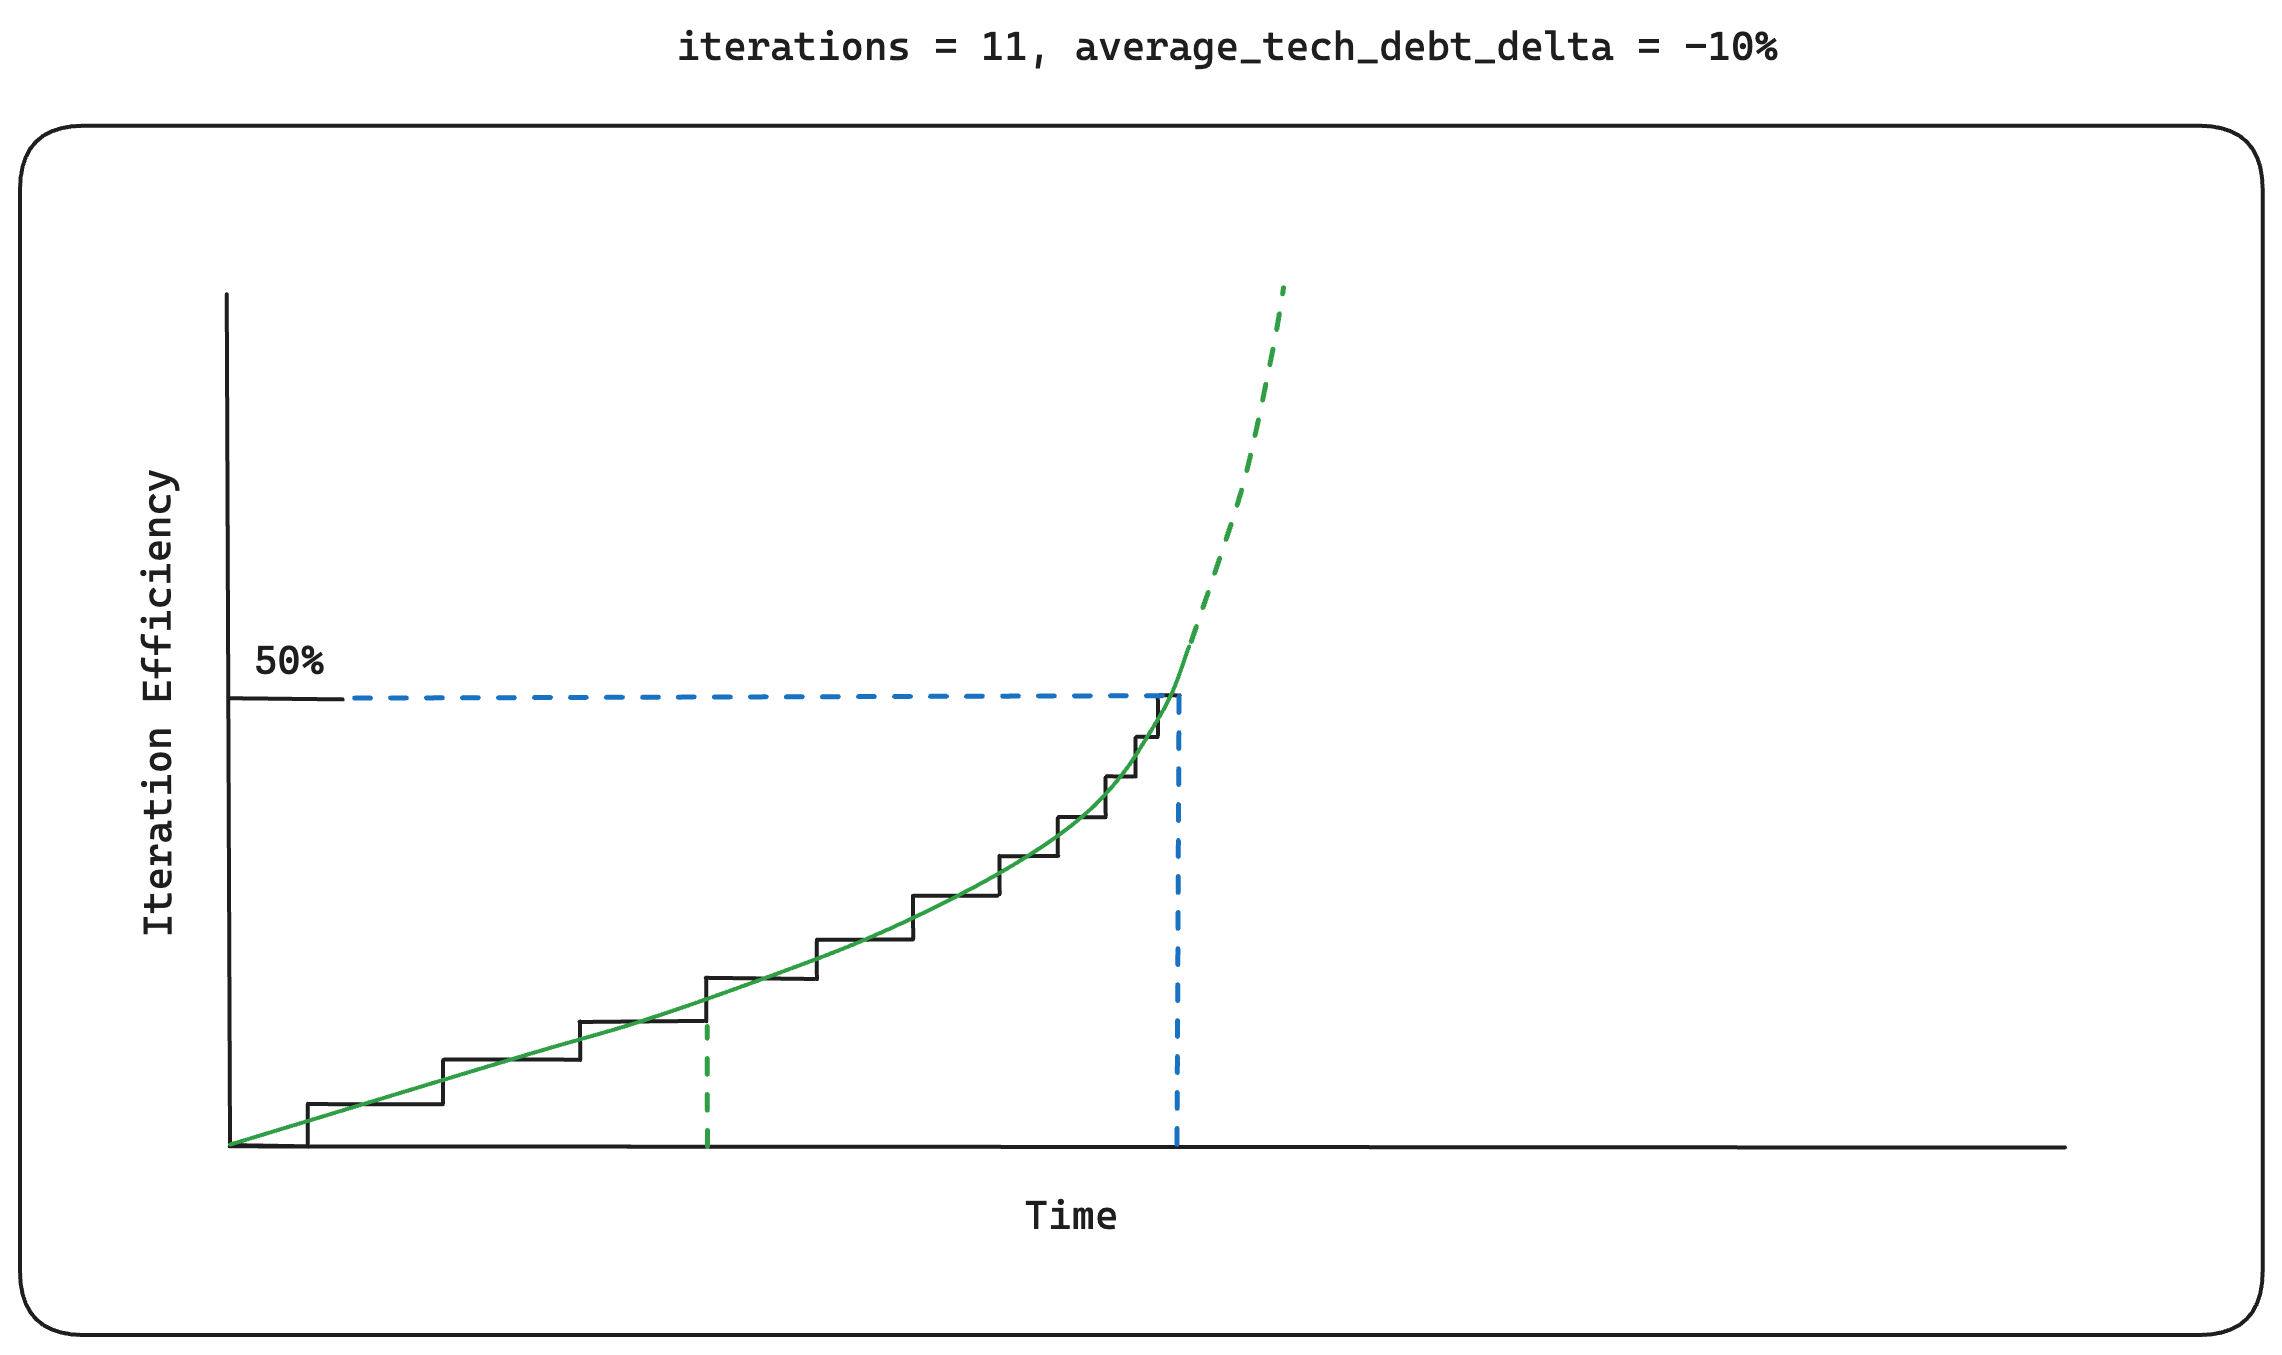 A chart showing iteration efficiency over 11 iterations with an average technical debt delta of -10%